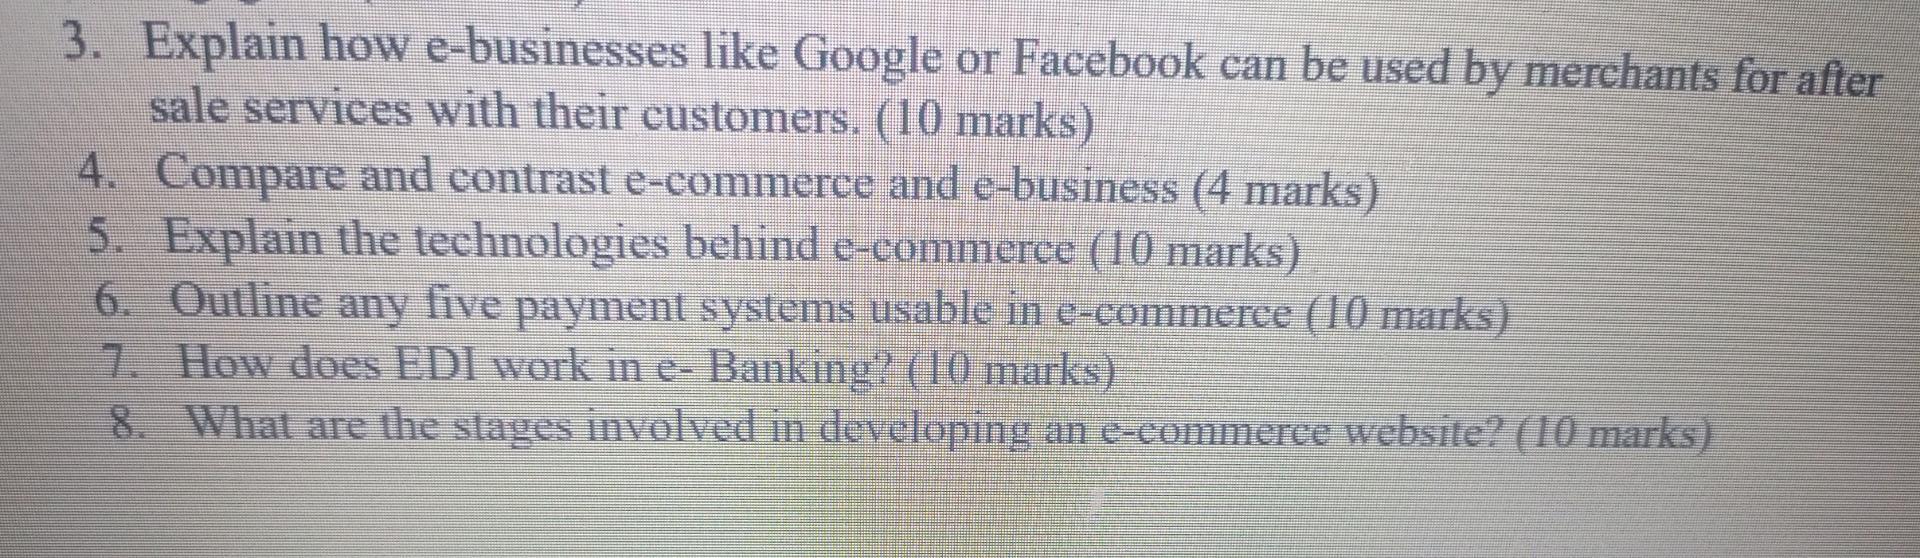 3. Explain how e-businesses like Google or Facebook can be used by merchants for after sale services with